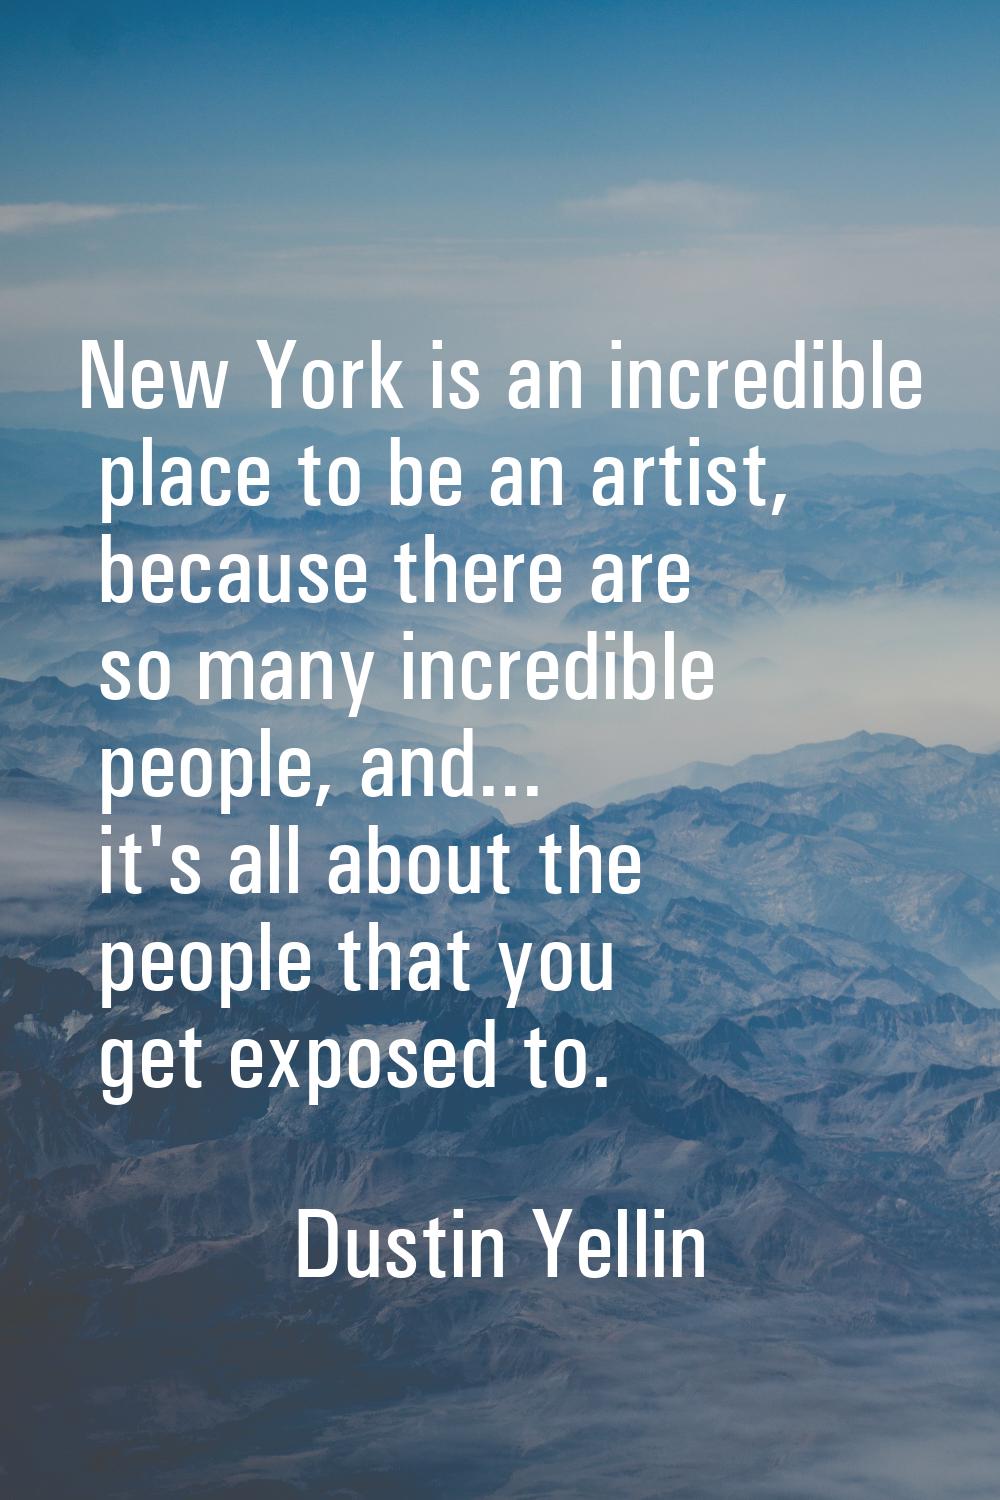 New York is an incredible place to be an artist, because there are so many incredible people, and..